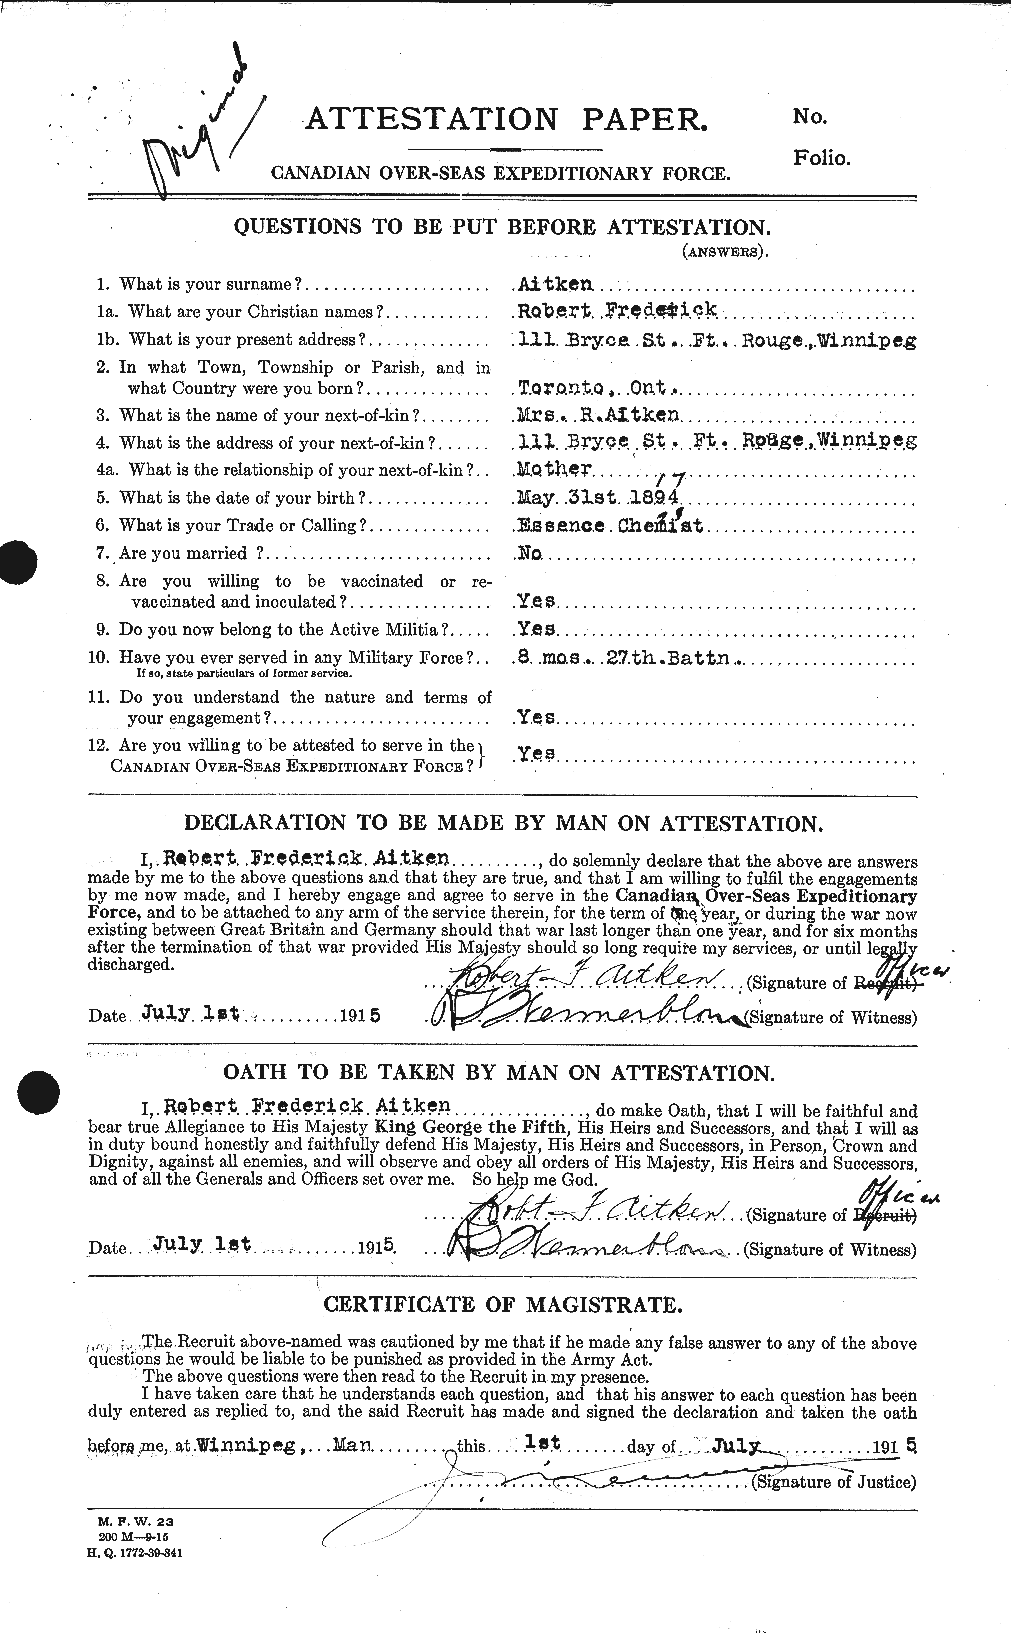 Personnel Records of the First World War - CEF 203434a